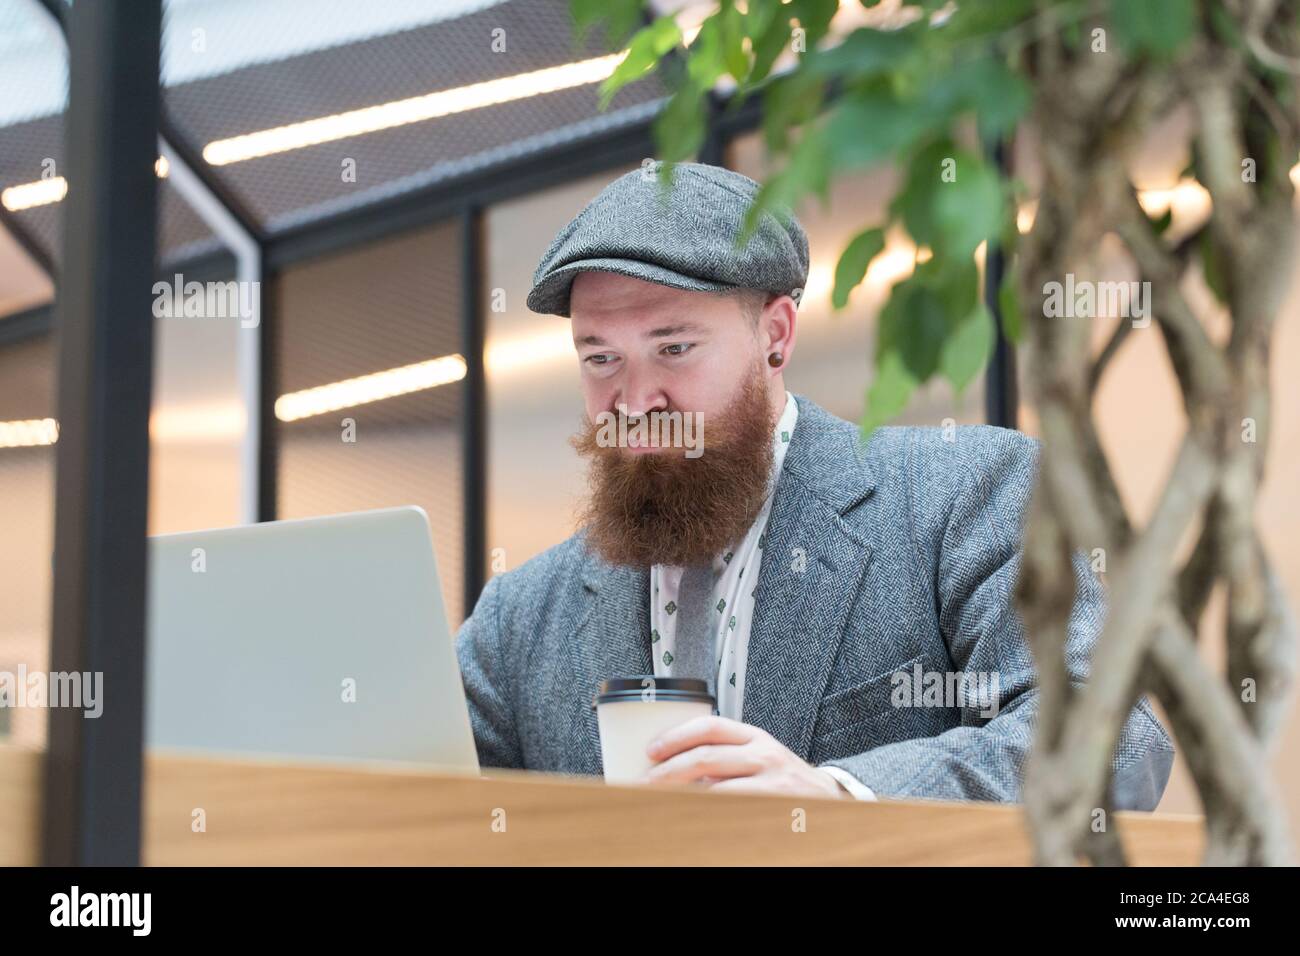 Portrait of brutal bearded hipster man wearing wool blazer, cap working on laptop sitting in cafe/ restaurant, drinking coffee from a paper cup, indoo Stock Photo